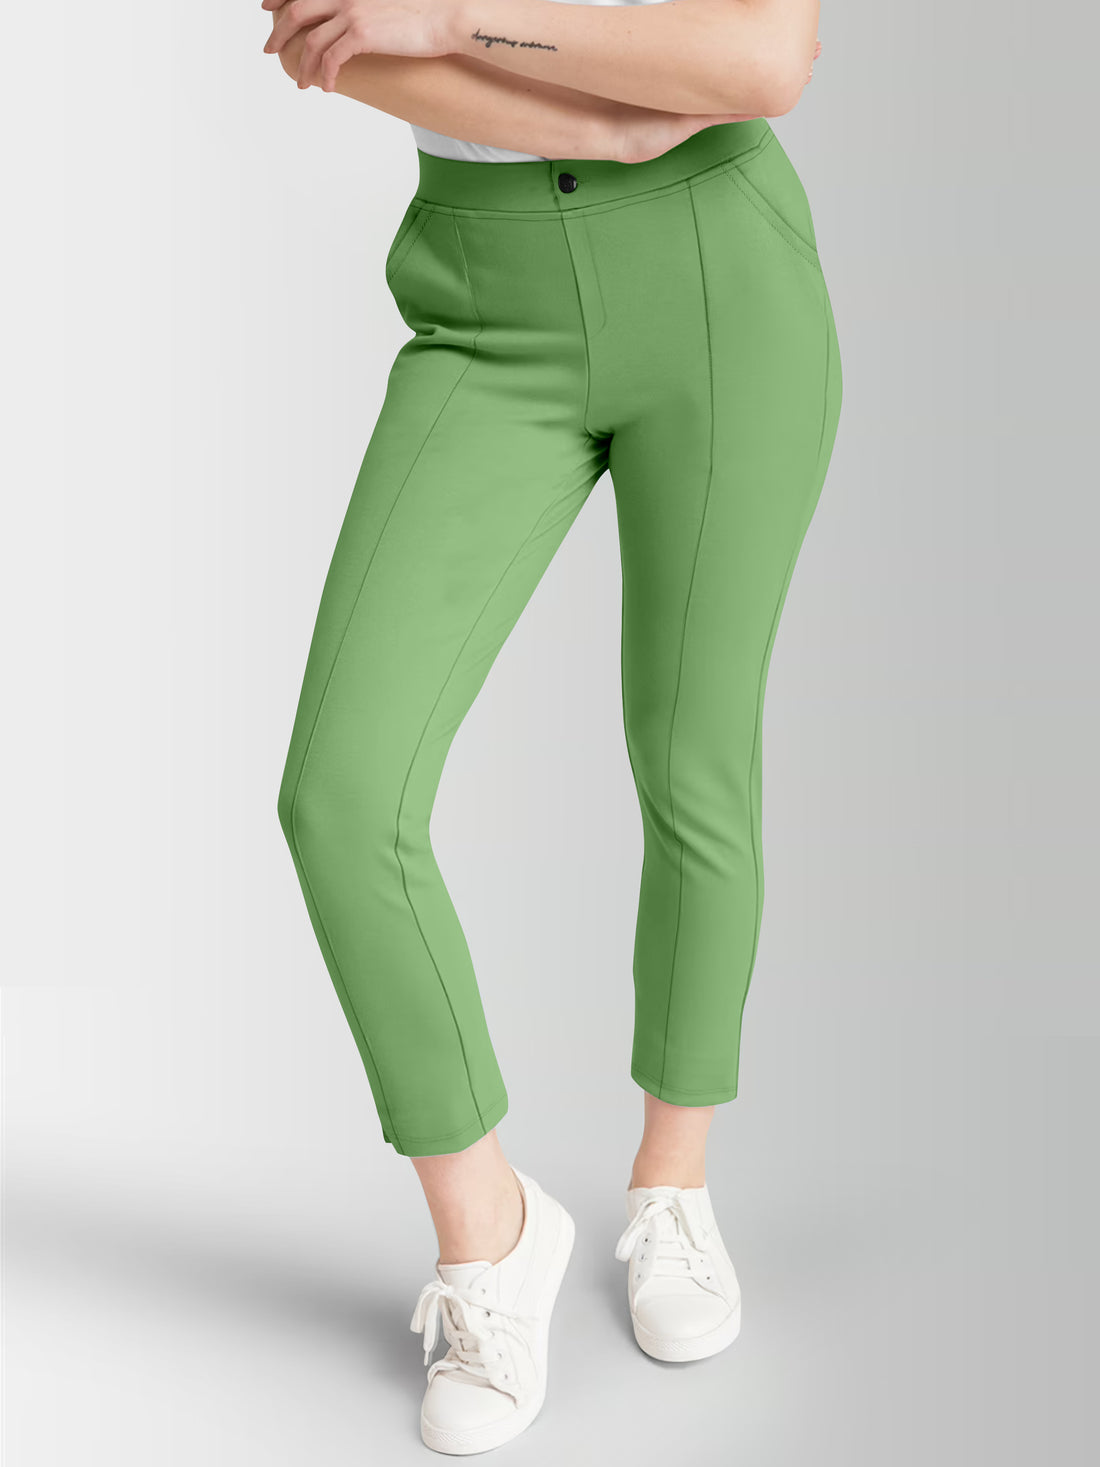 Women's Pista Skinny Fit High Rise Clean Look Regular Length Stretchable Trouser.Track Pant.Jogger.Pant.Body Fit Pent.Formal Trouser.